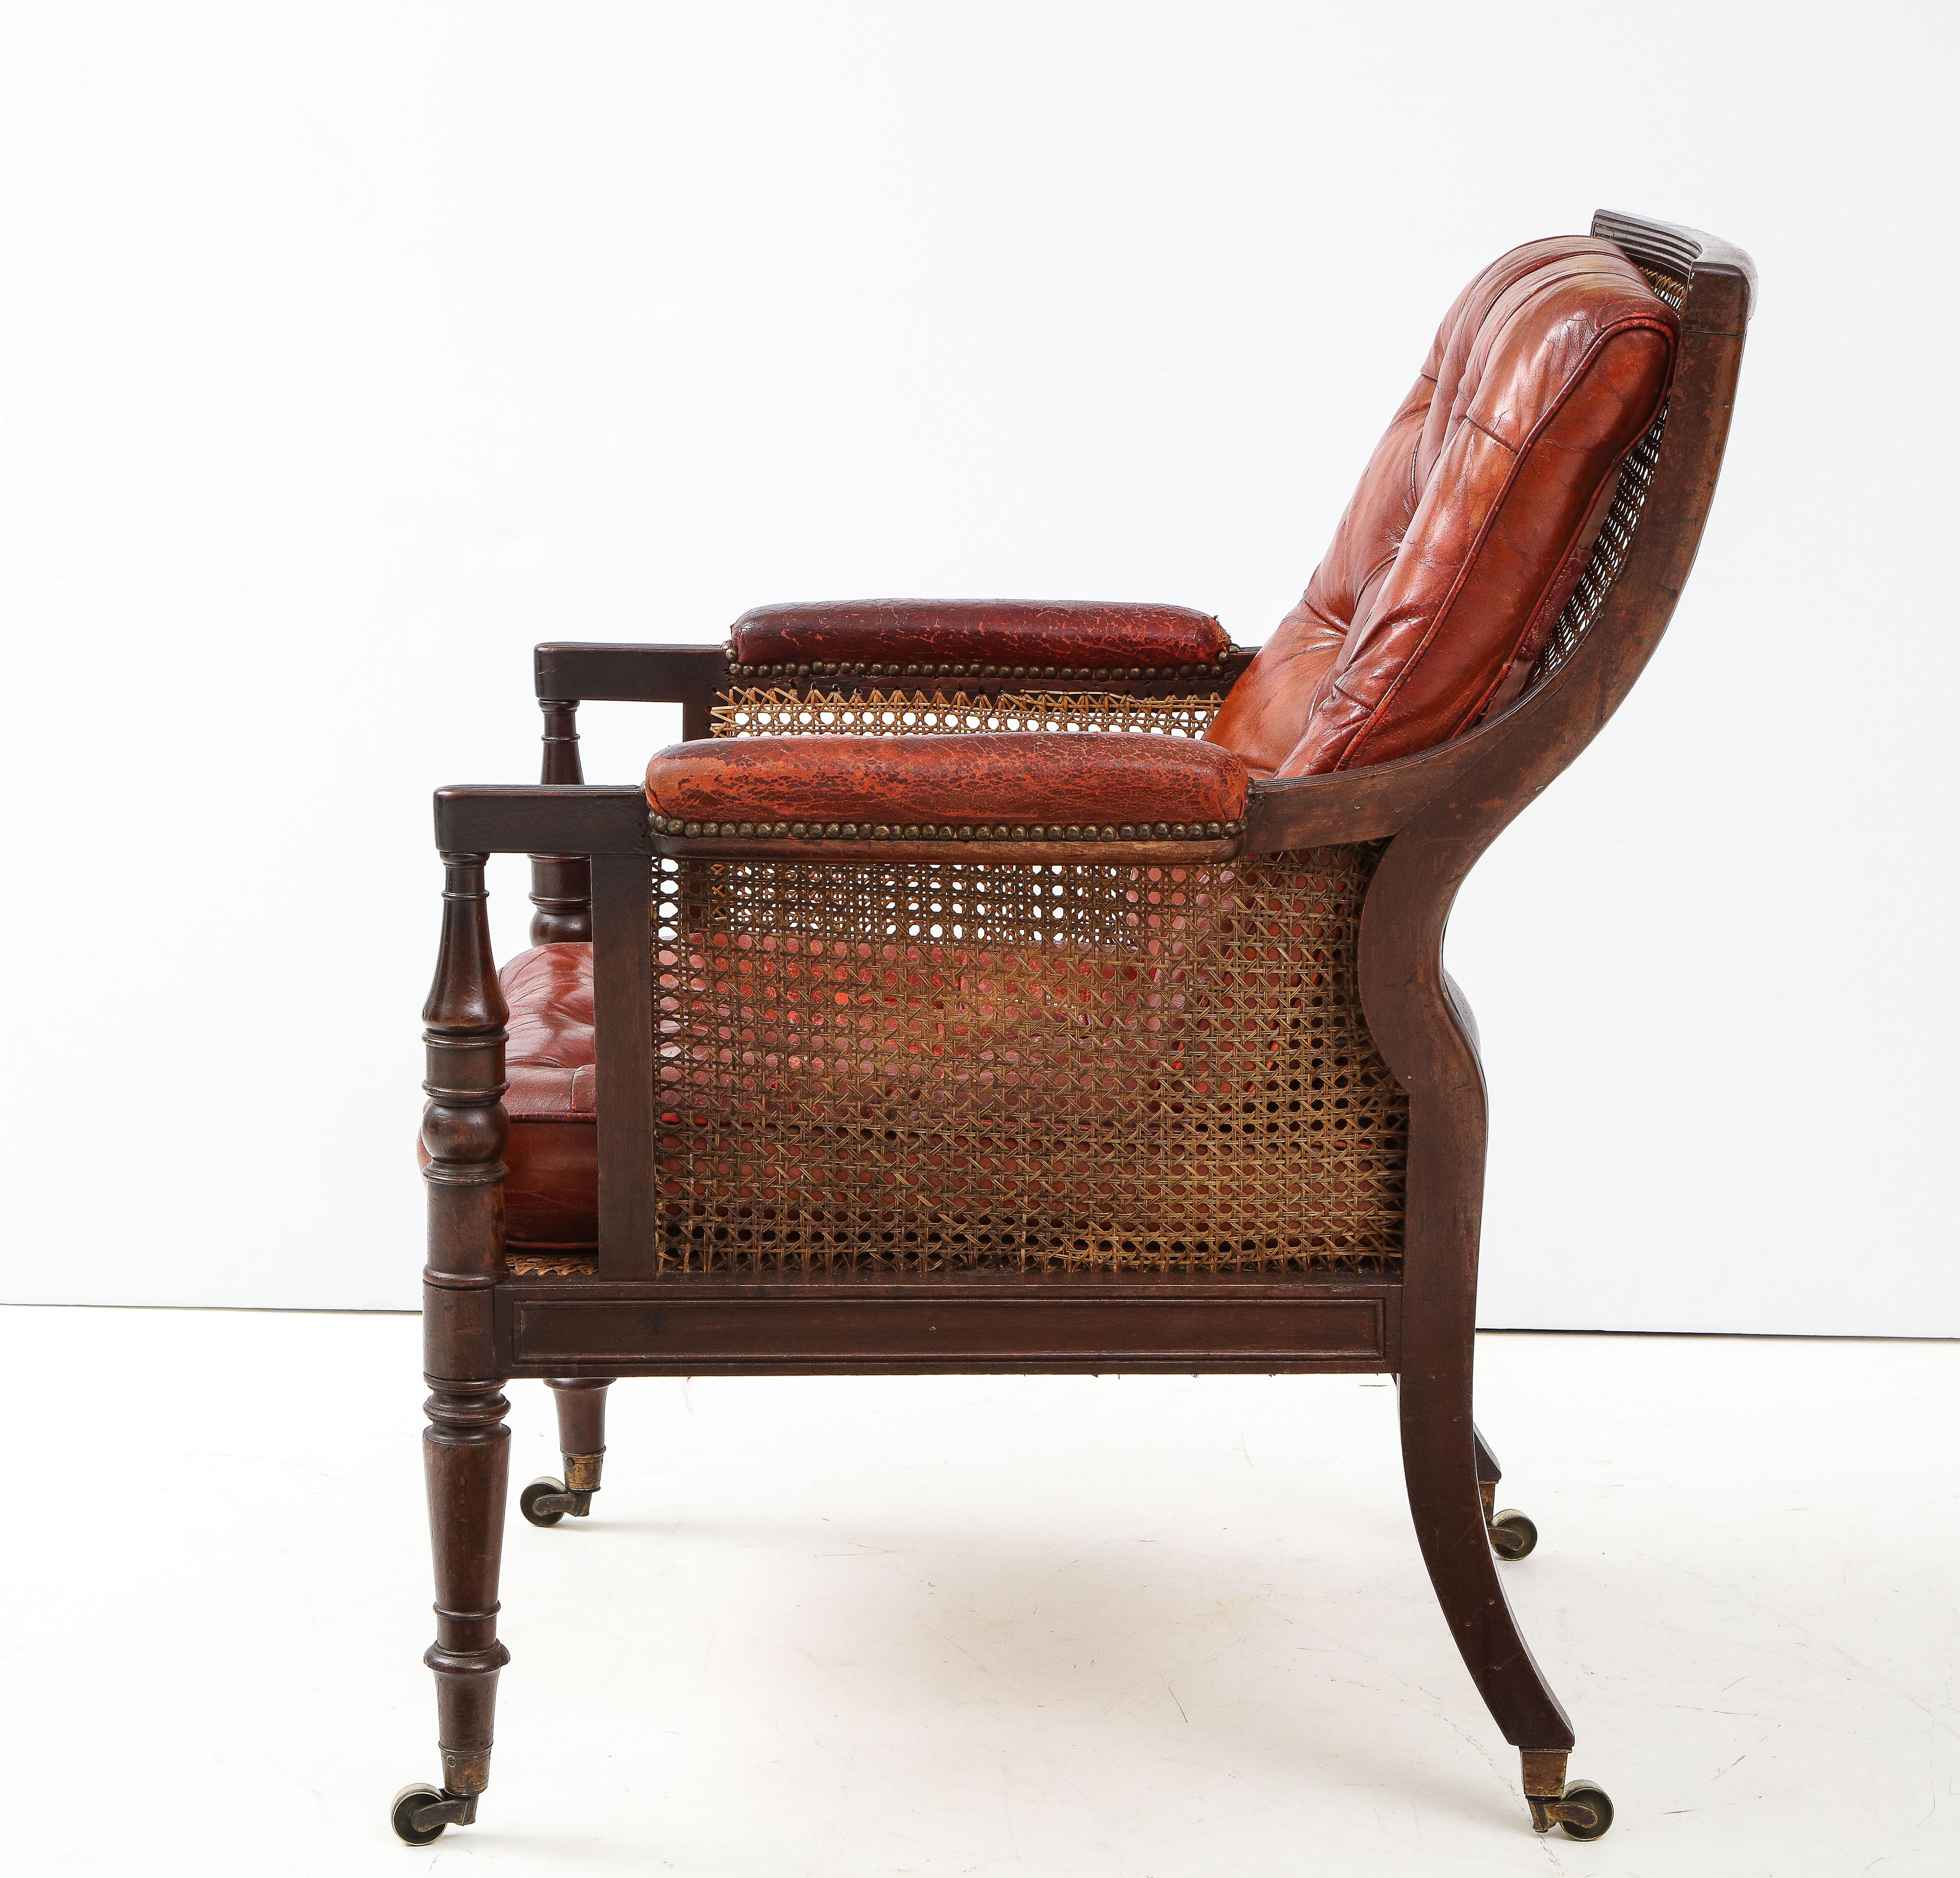 Fine George IV bergere the square back with ribbed rails and caning behind buttoned leather cushion, the armpads and seat similarly upholstered, the sides and seat also caned and standing on turned legs with original casters, the whole with good